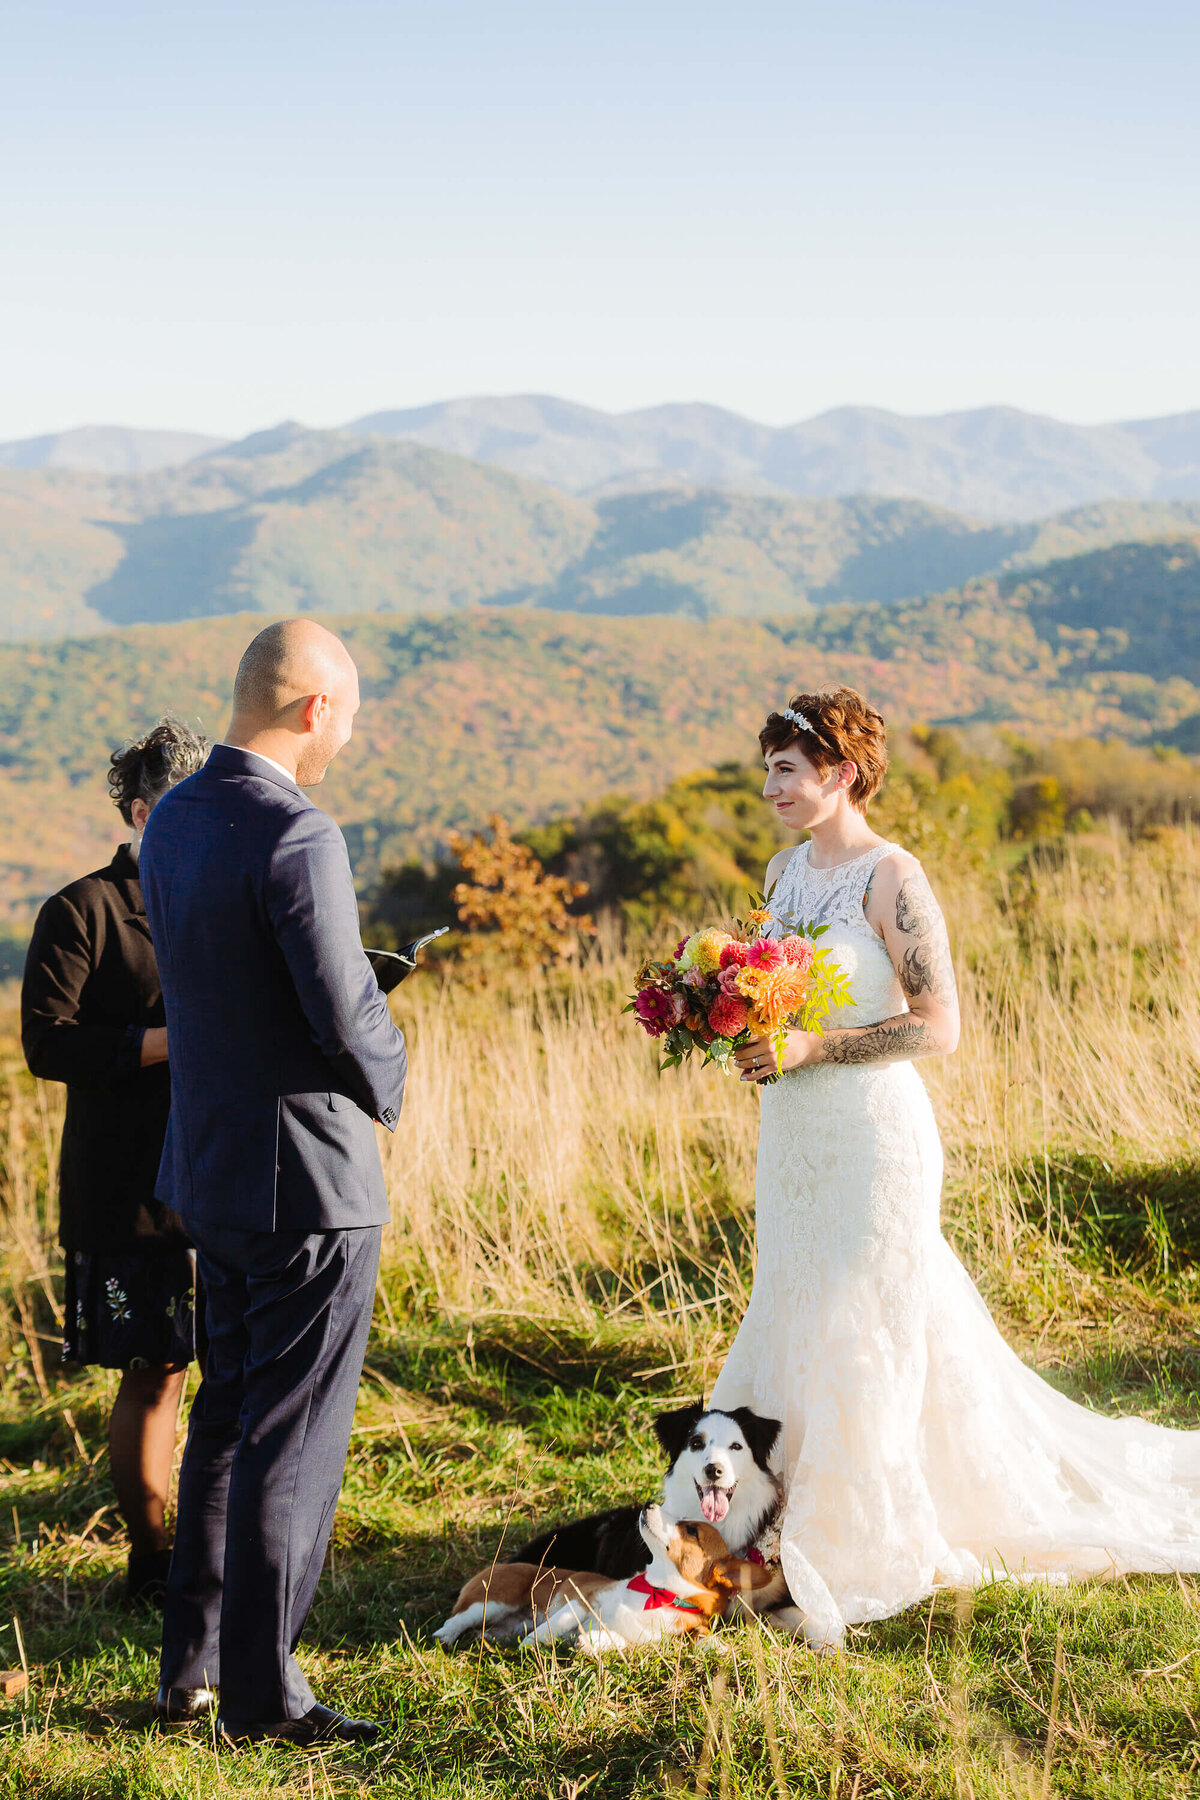 Max-Patch-NC-Mountain-Elopement-4